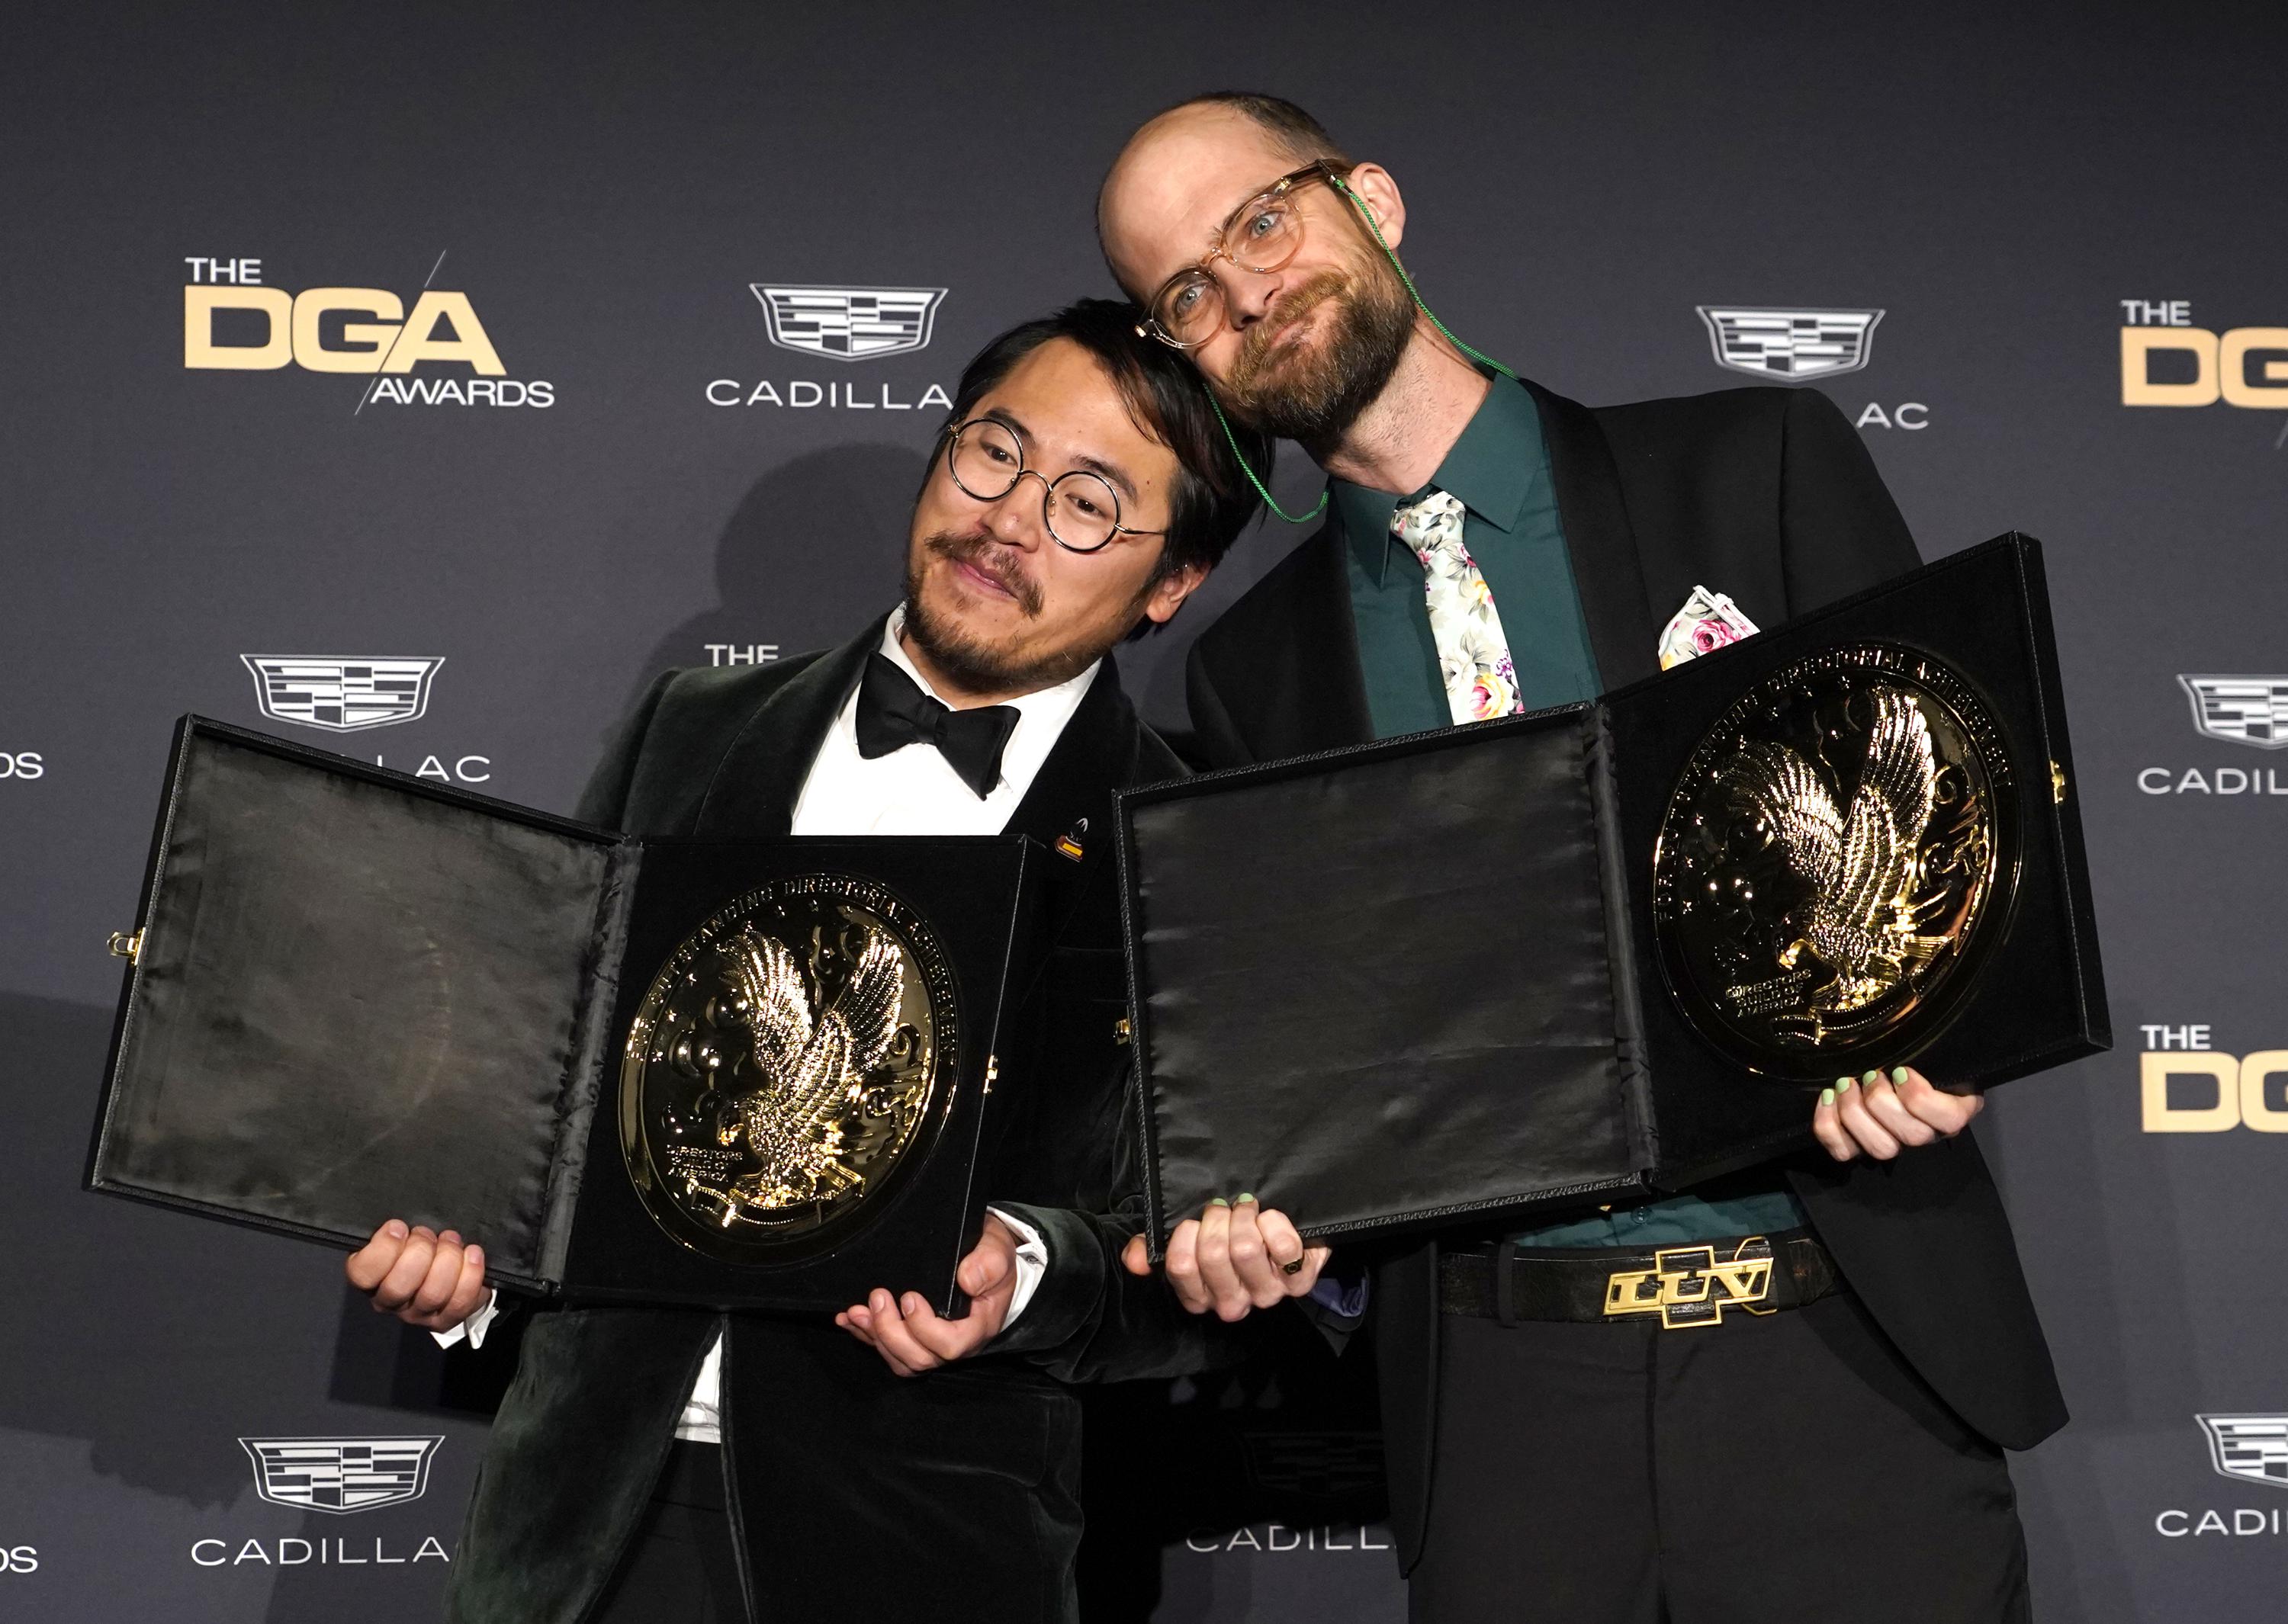 The Daniels win the DGA’s top prize, an Oscar bellwether